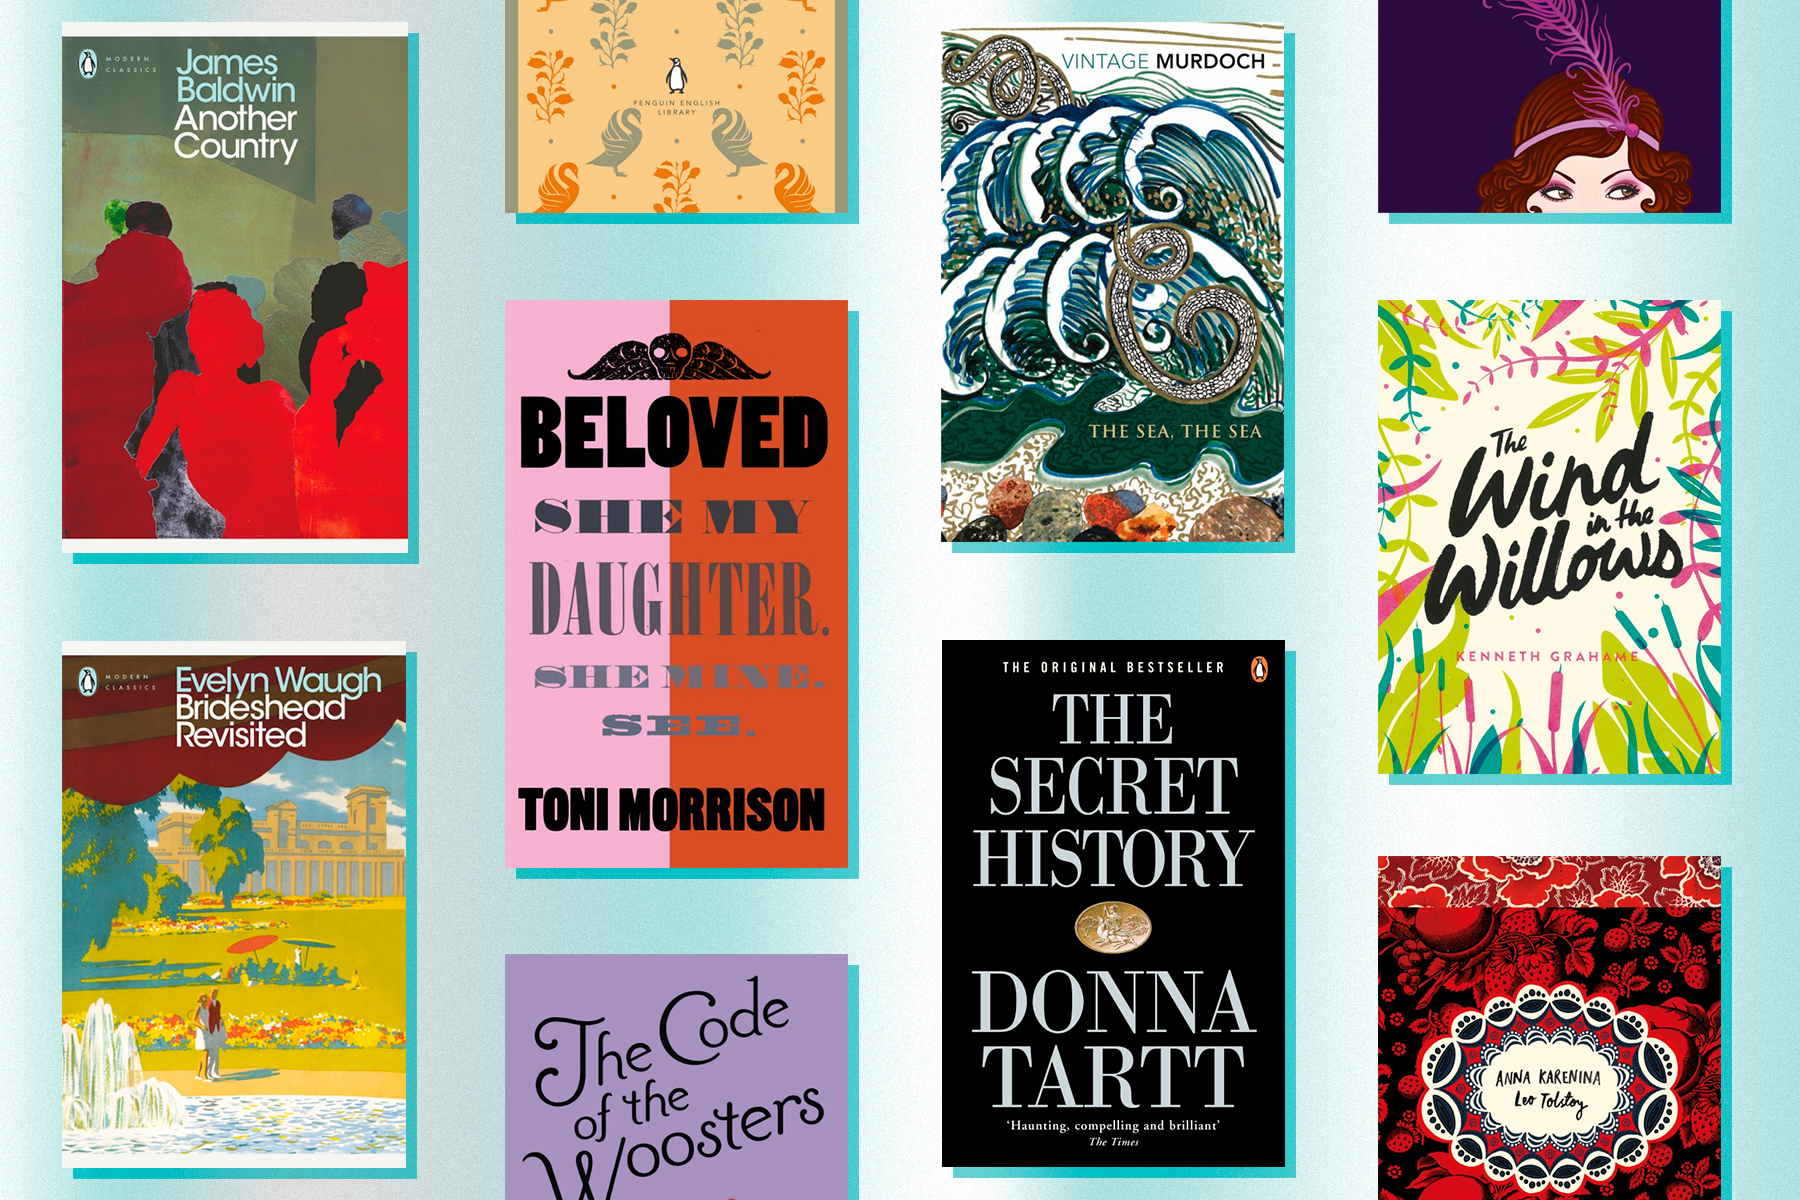 A collage of book covers on a light blue background. Titles include I Capture the Castle, Beloved, The Secret History and The Wind in the Willows.